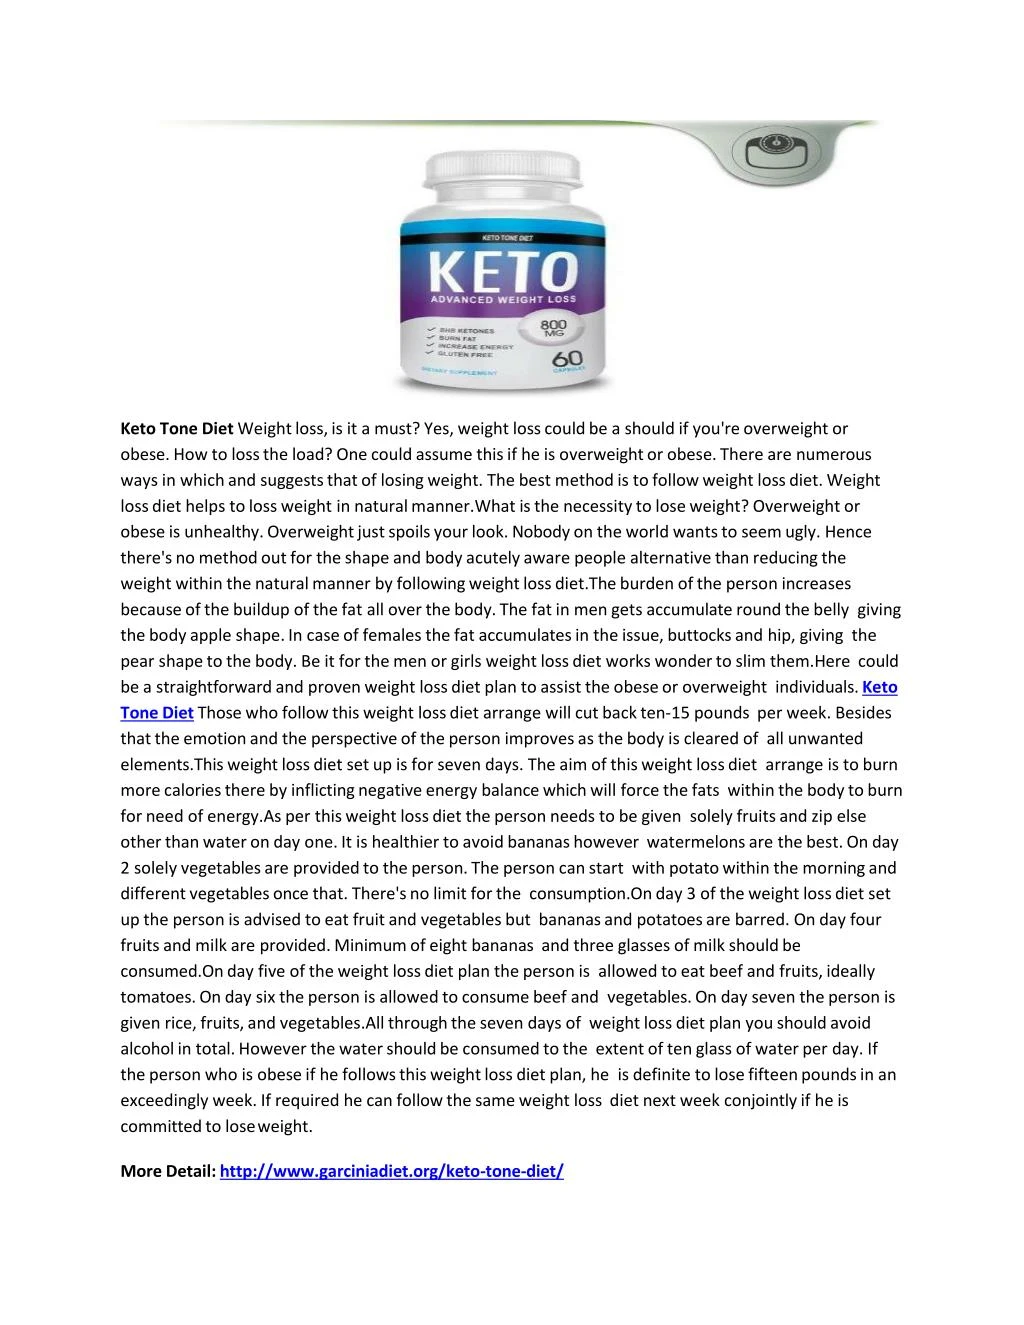 keto tone diet weight loss is it a must